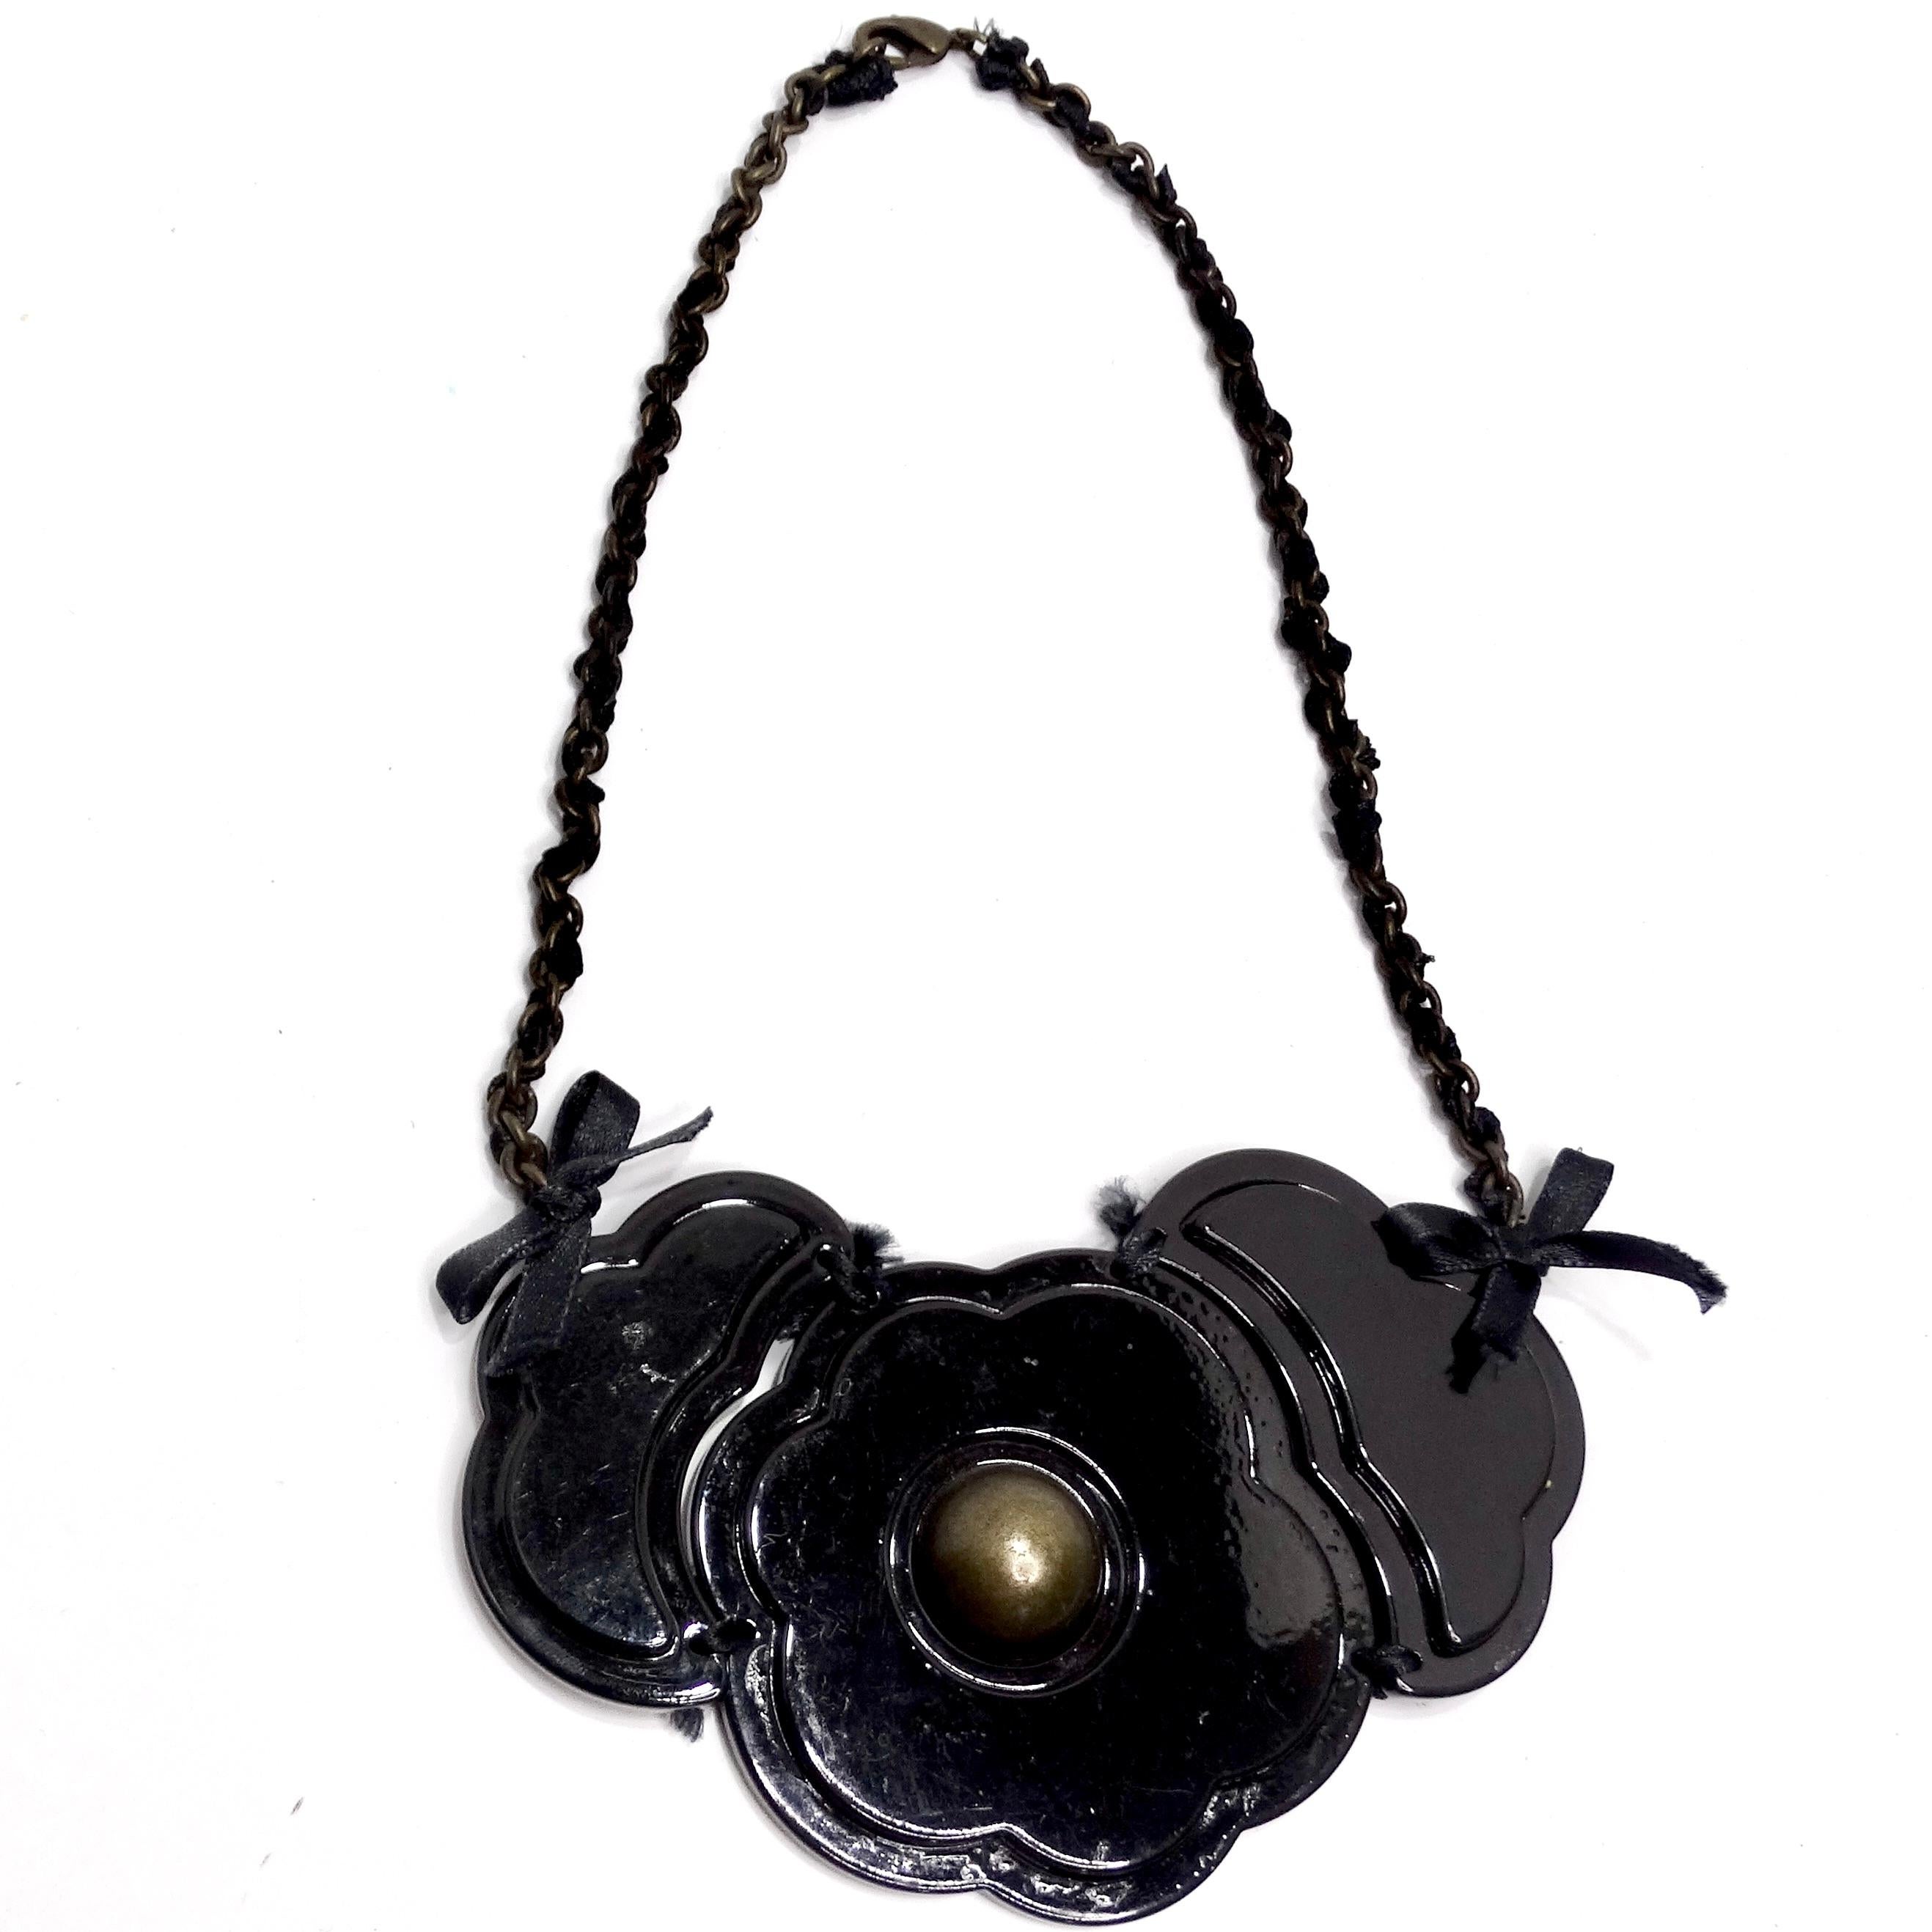 Introducing the Moschino 1990s Black Flower Necklace – a delightful blast from the past that adds a touch of fun and flair to your style. The 1990s were an era of bold and whimsical fashion, and this necklace perfectly captures that spirit. It's a